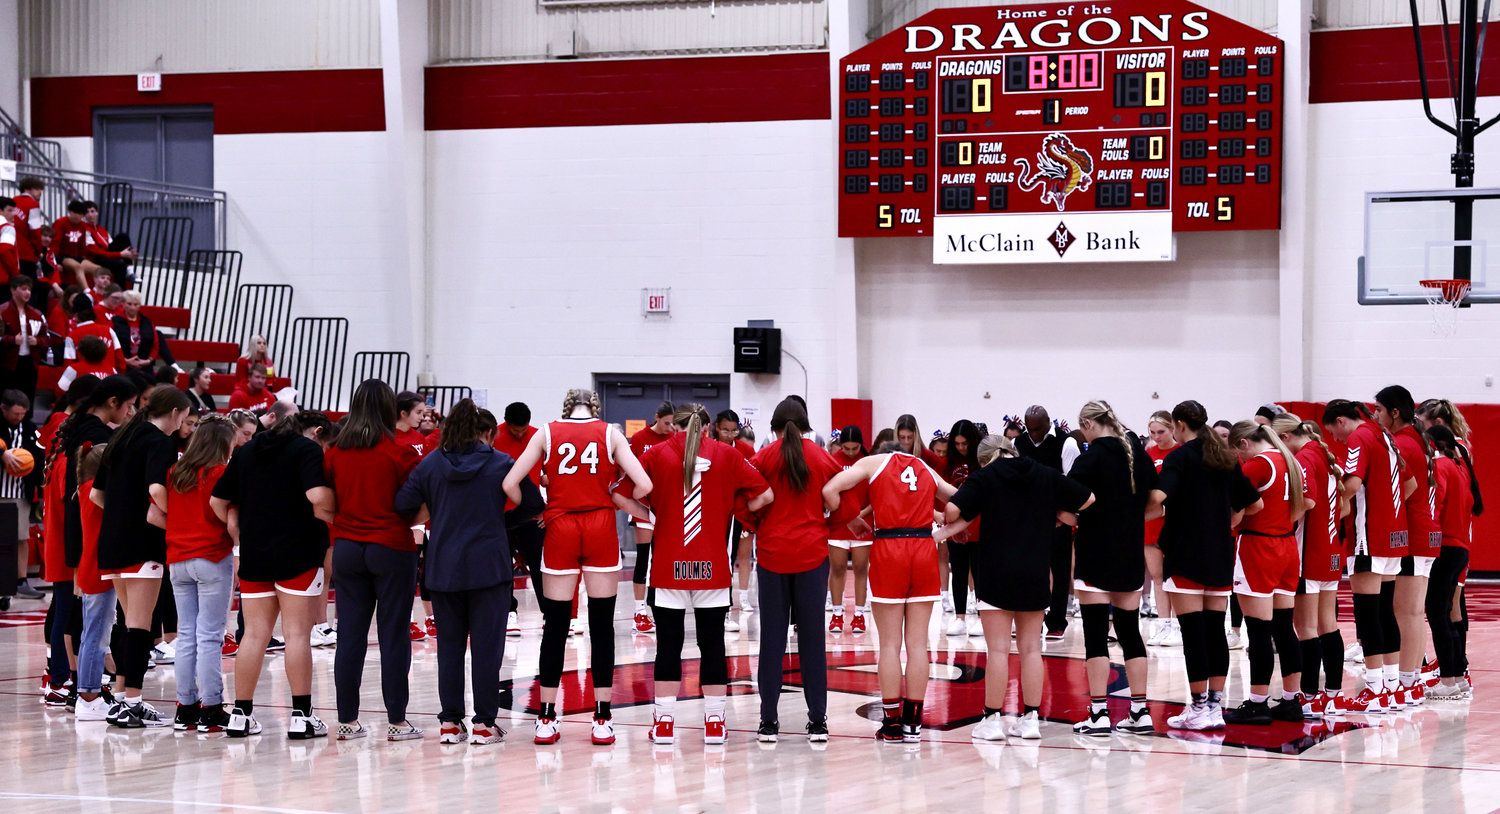 Both the Purcell and Washington girls basketball teams gathered at midcourt before their game November 29 for a moment of silence to honor Kendra Kilpatrick, a Stillwater High School math teacher and girls basketball coach. Kilpatrick had died of cancer days prior to the game.